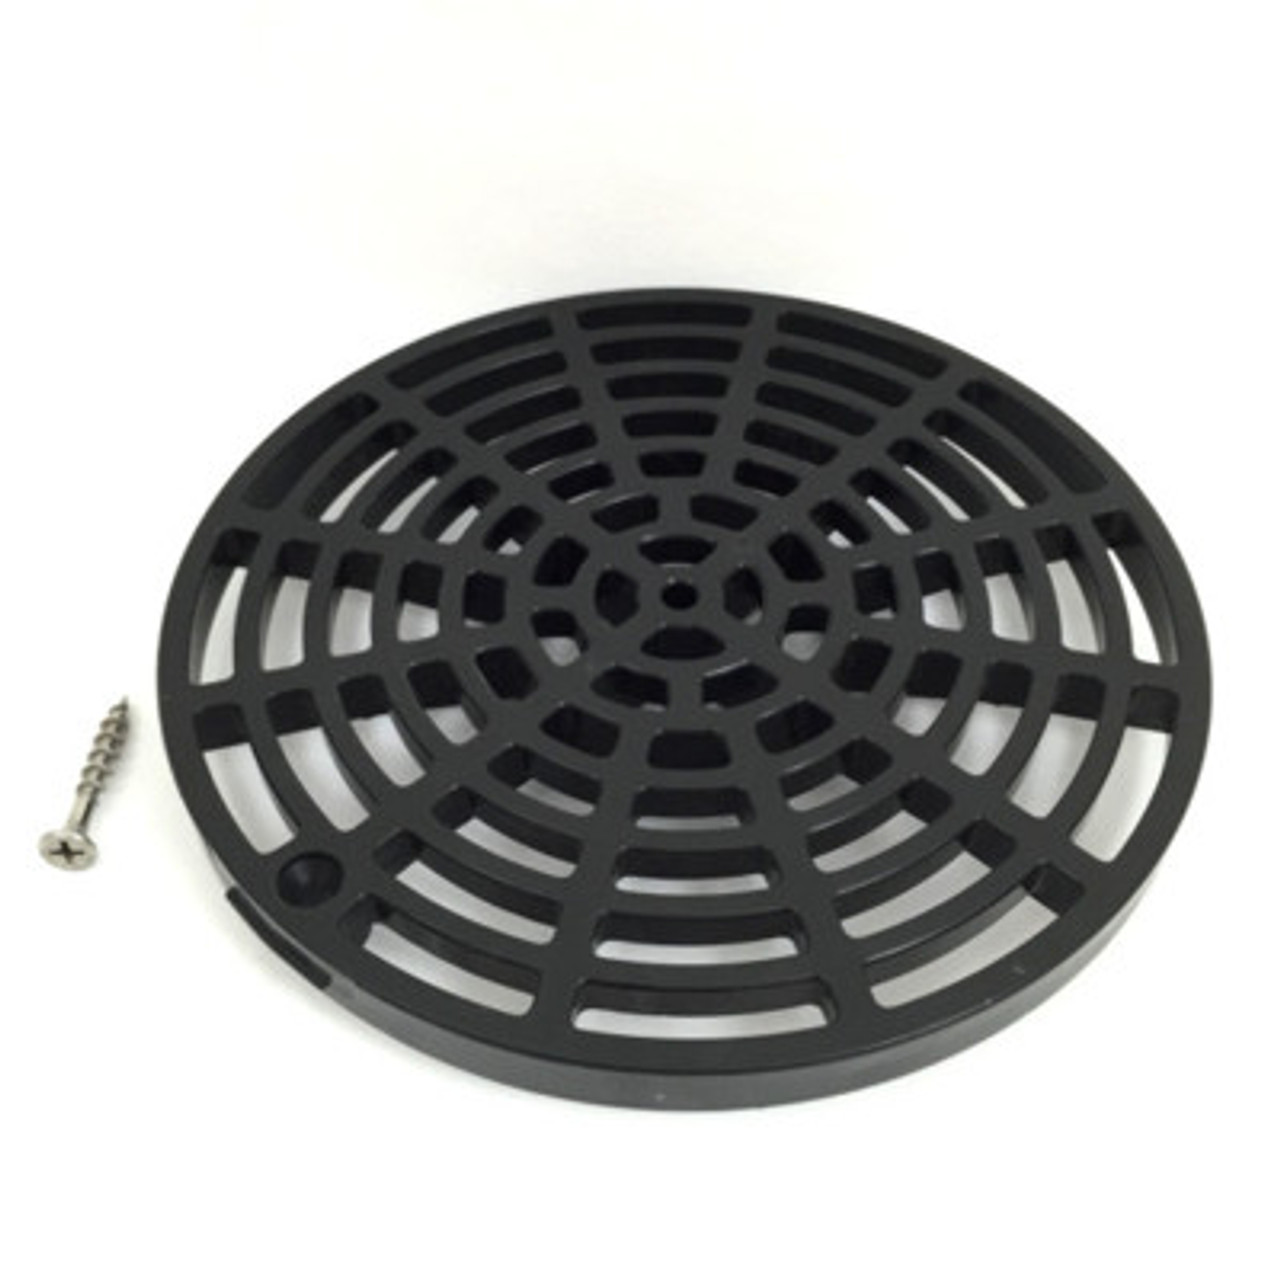 1pc Solid Color Floor Drain Cover, Modern Plastic Household Sewer